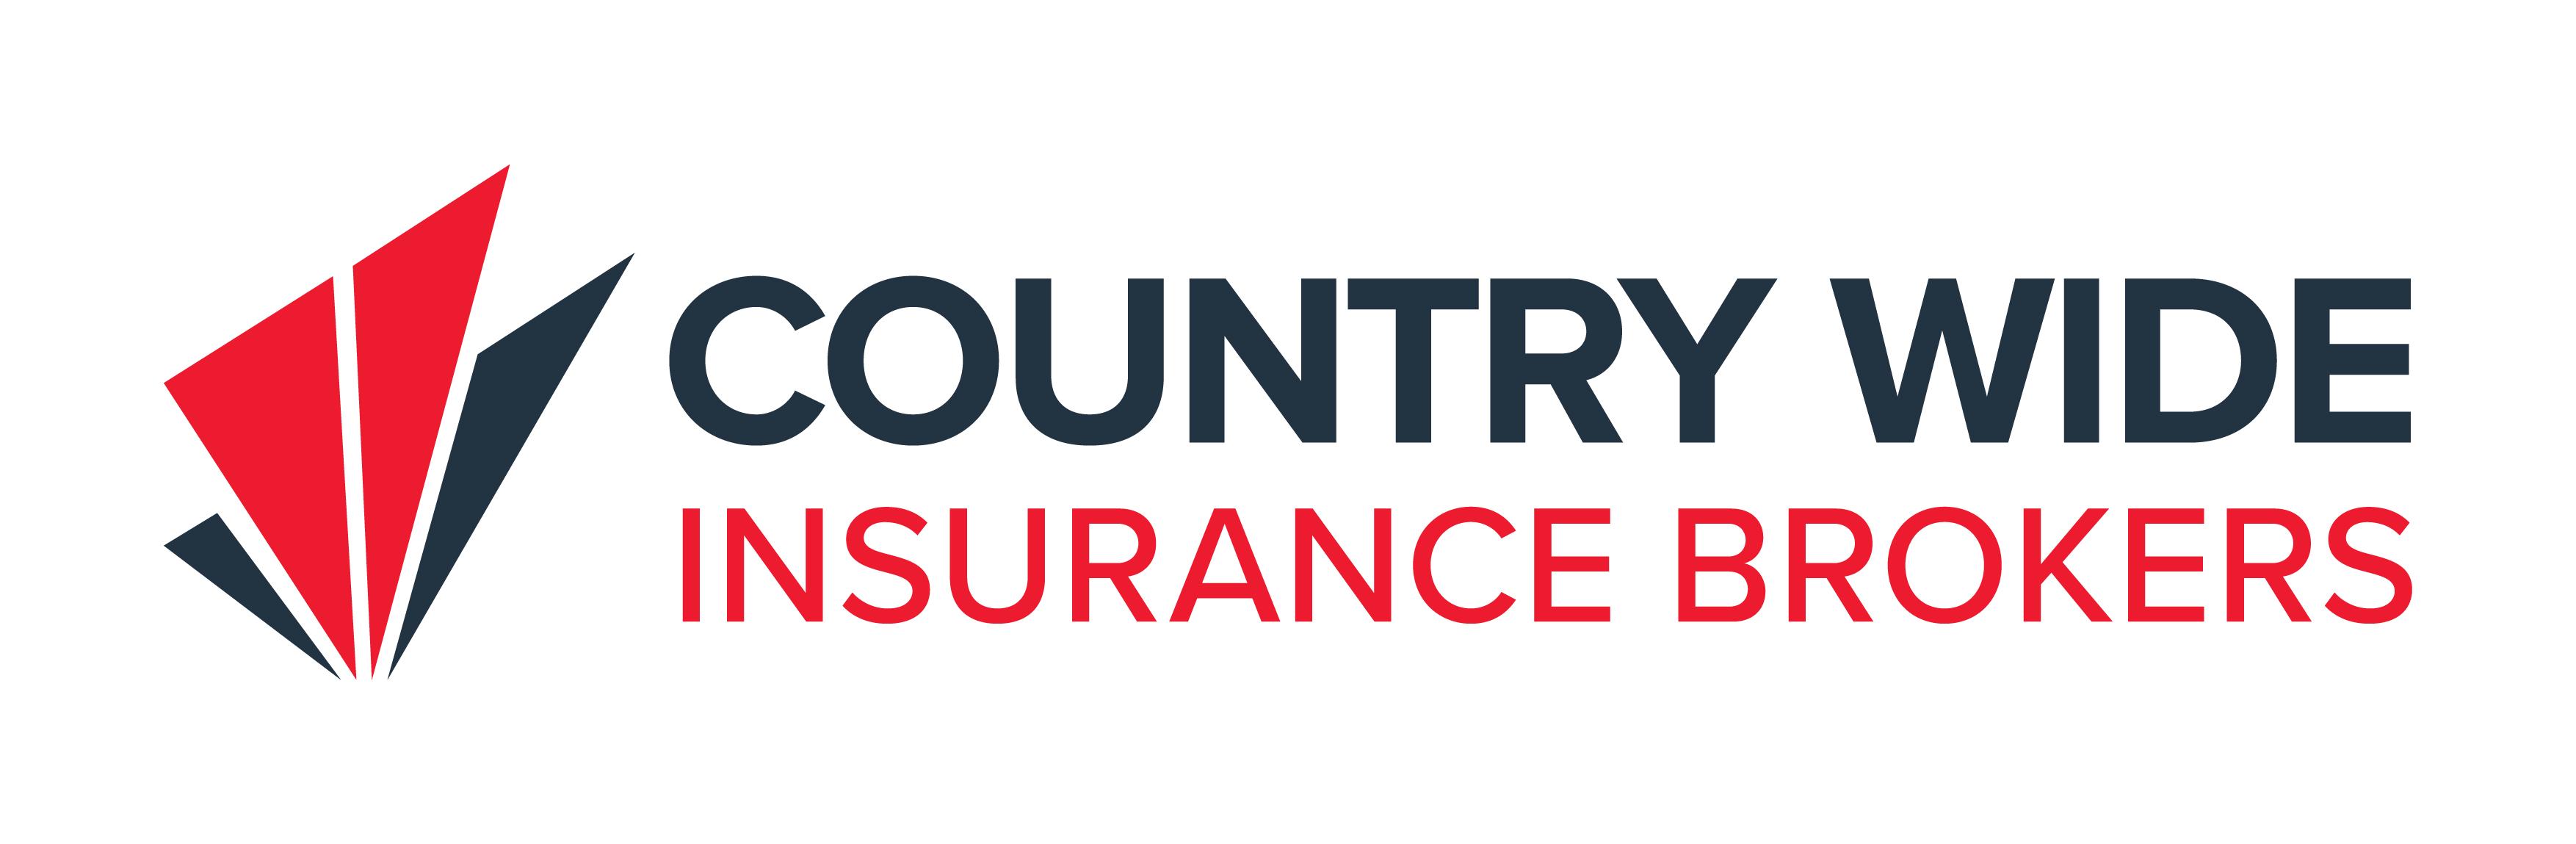 Country Wide Insurance Brokers